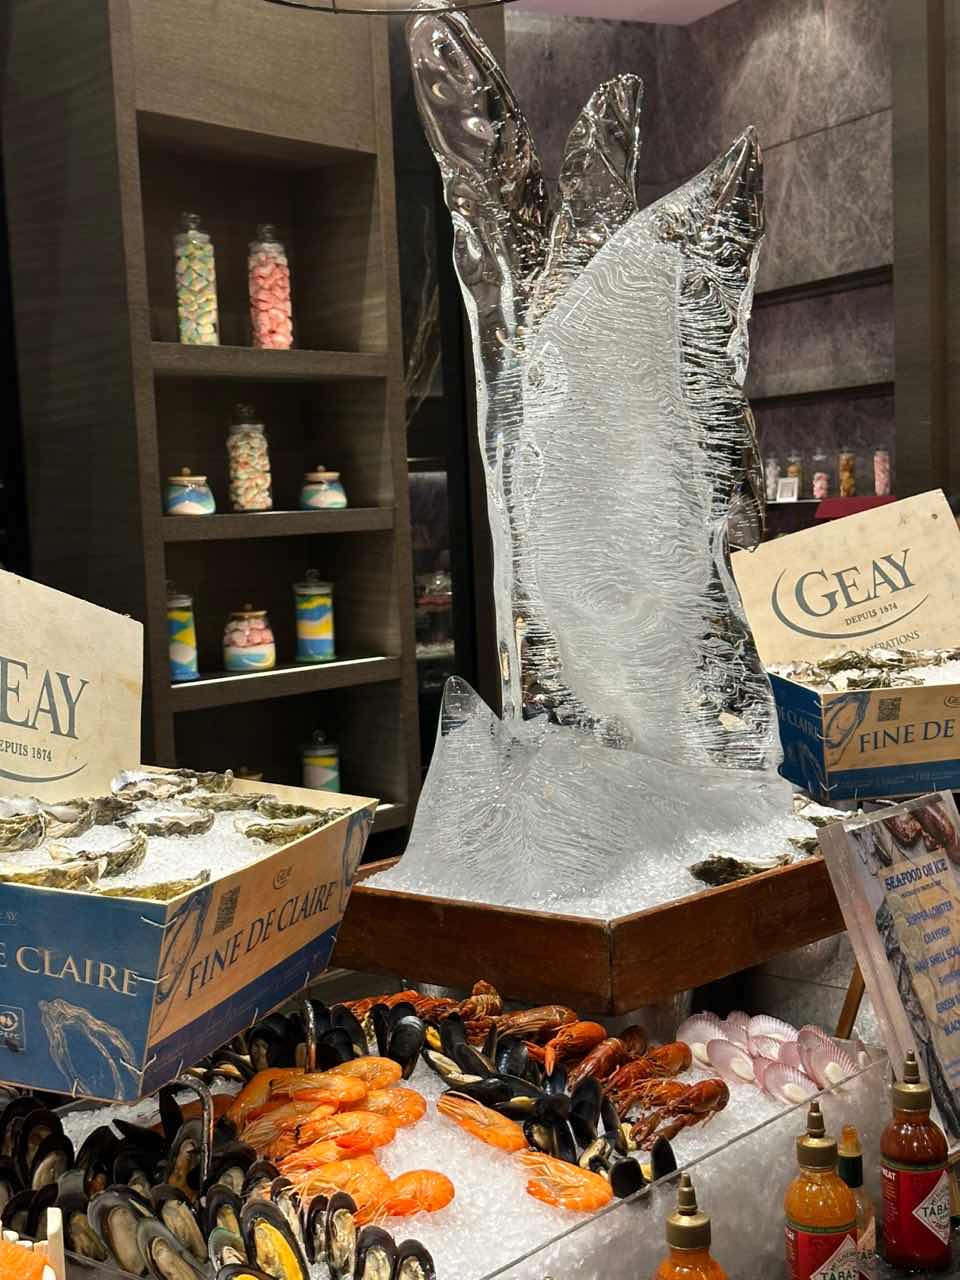 Carved ice on display with different types of raw fishes and seafood